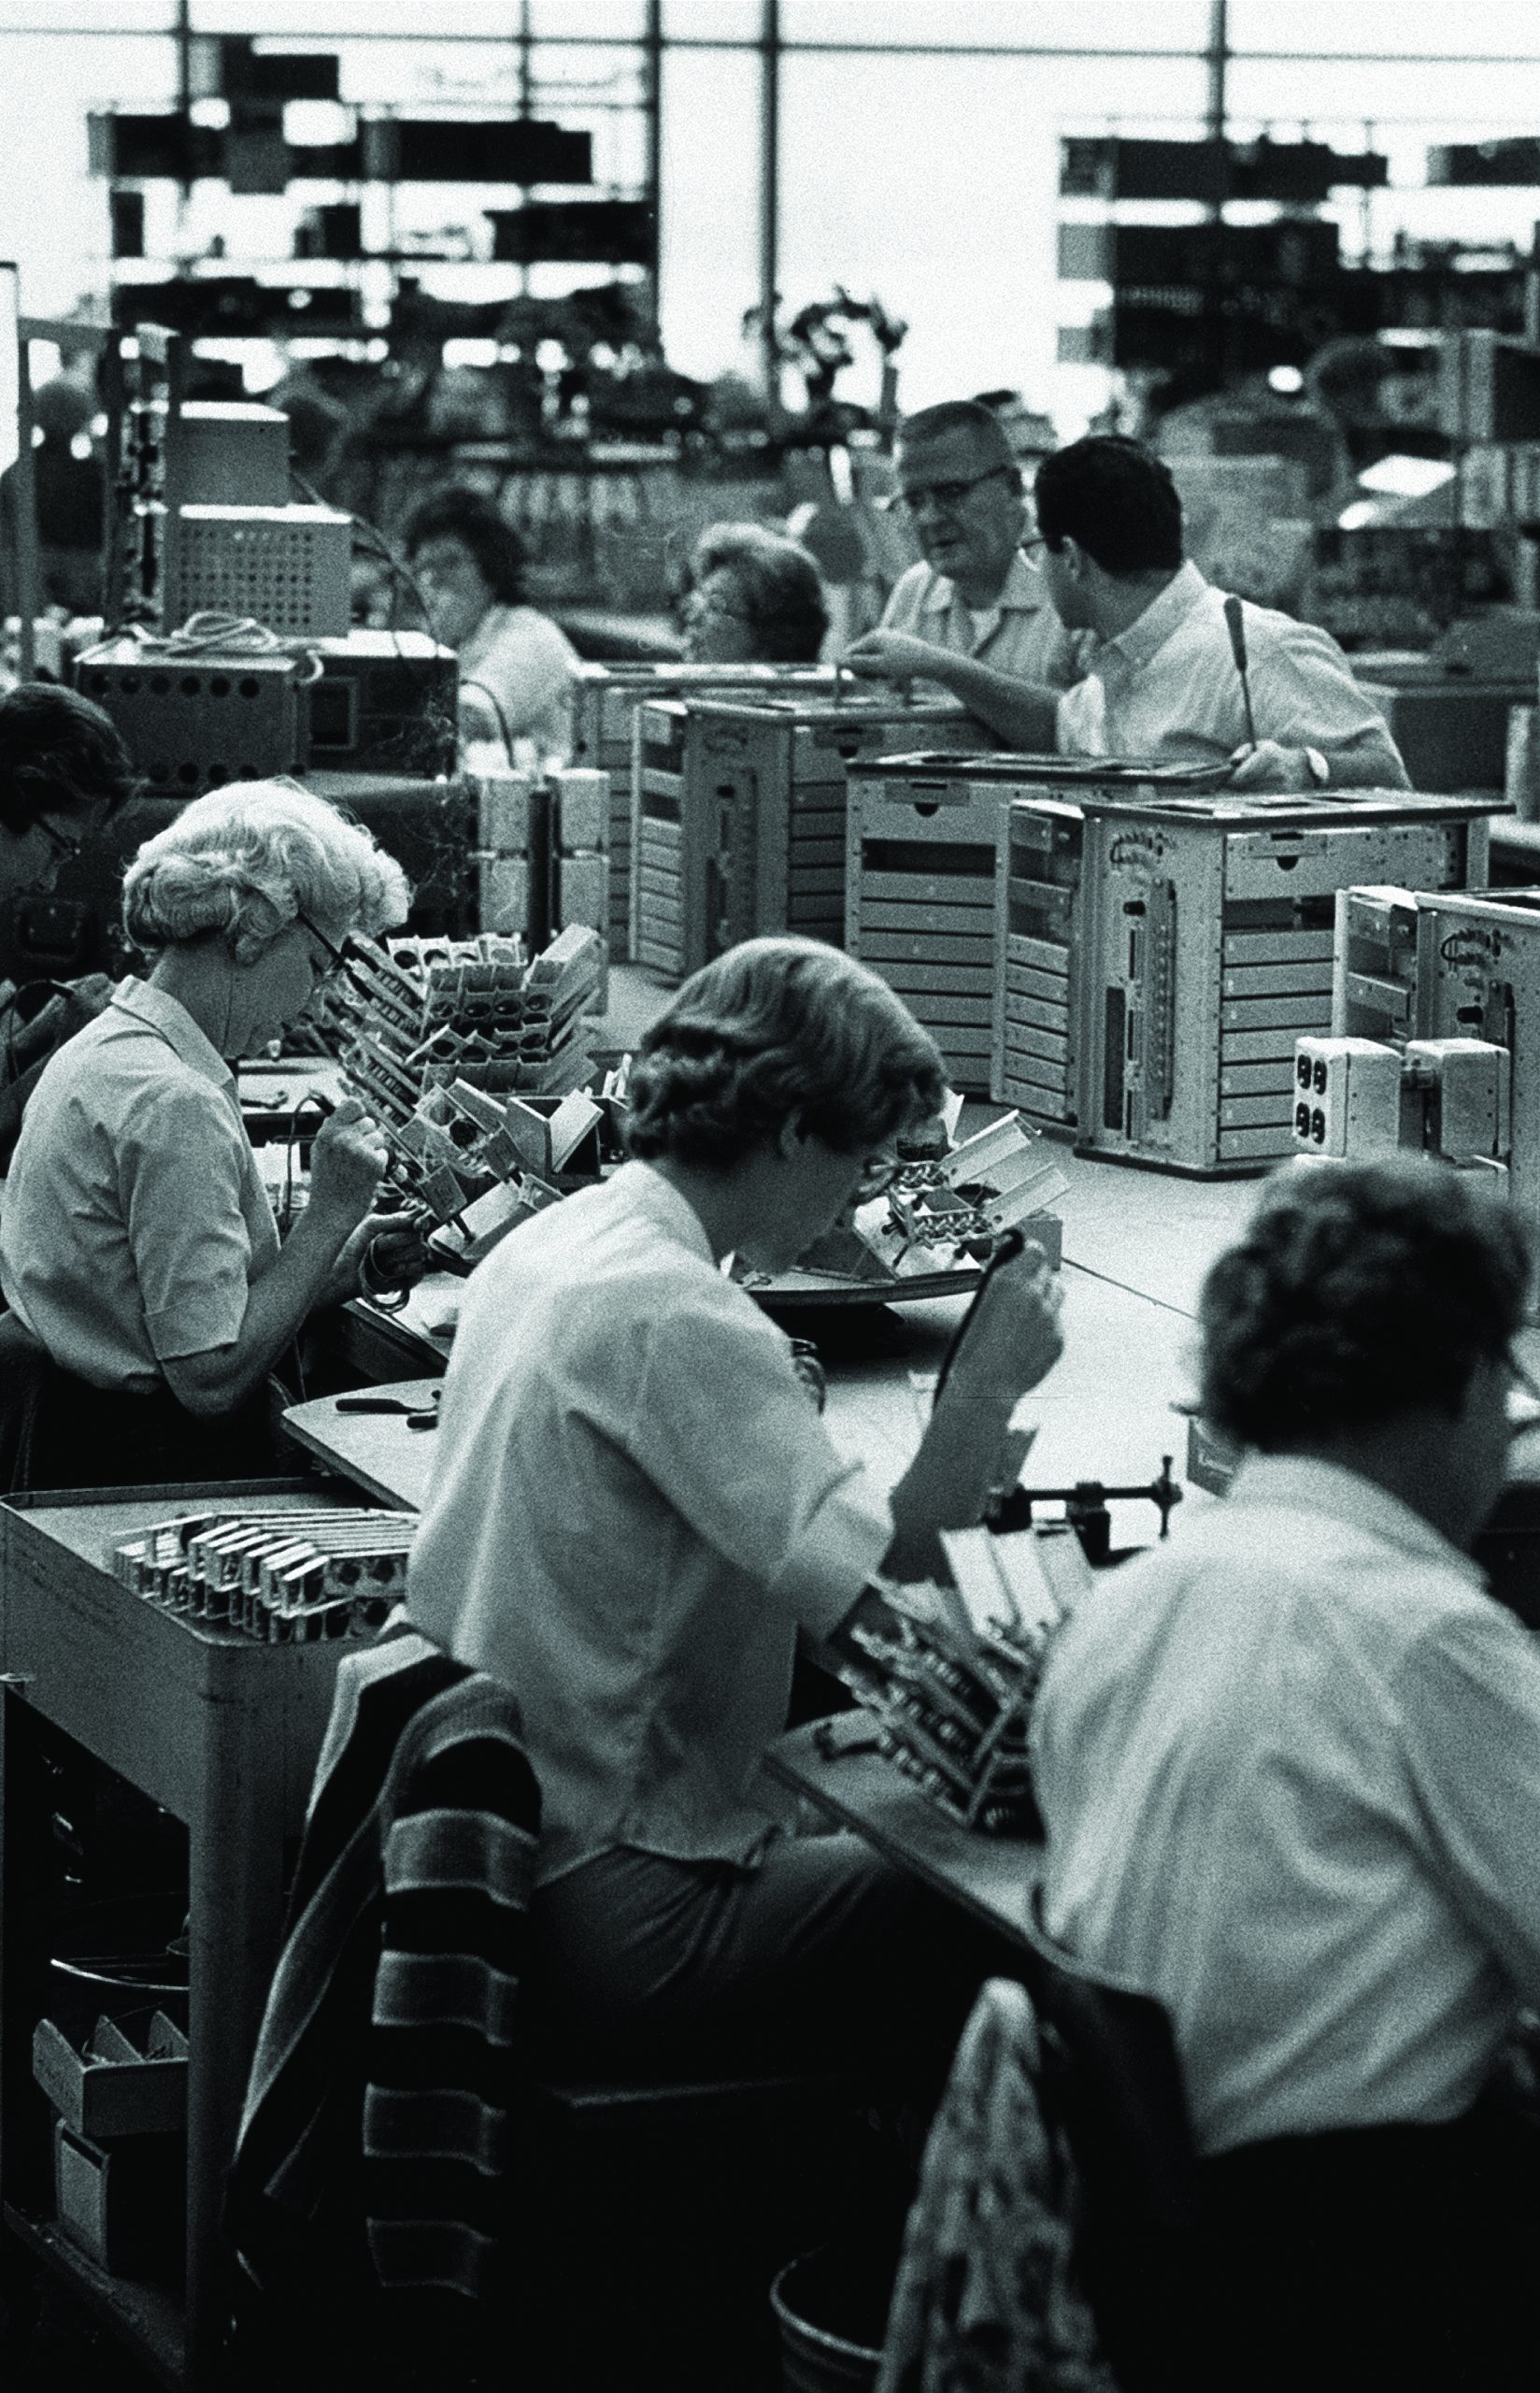 HP employees in a production facility with three women soldering in the foreground.